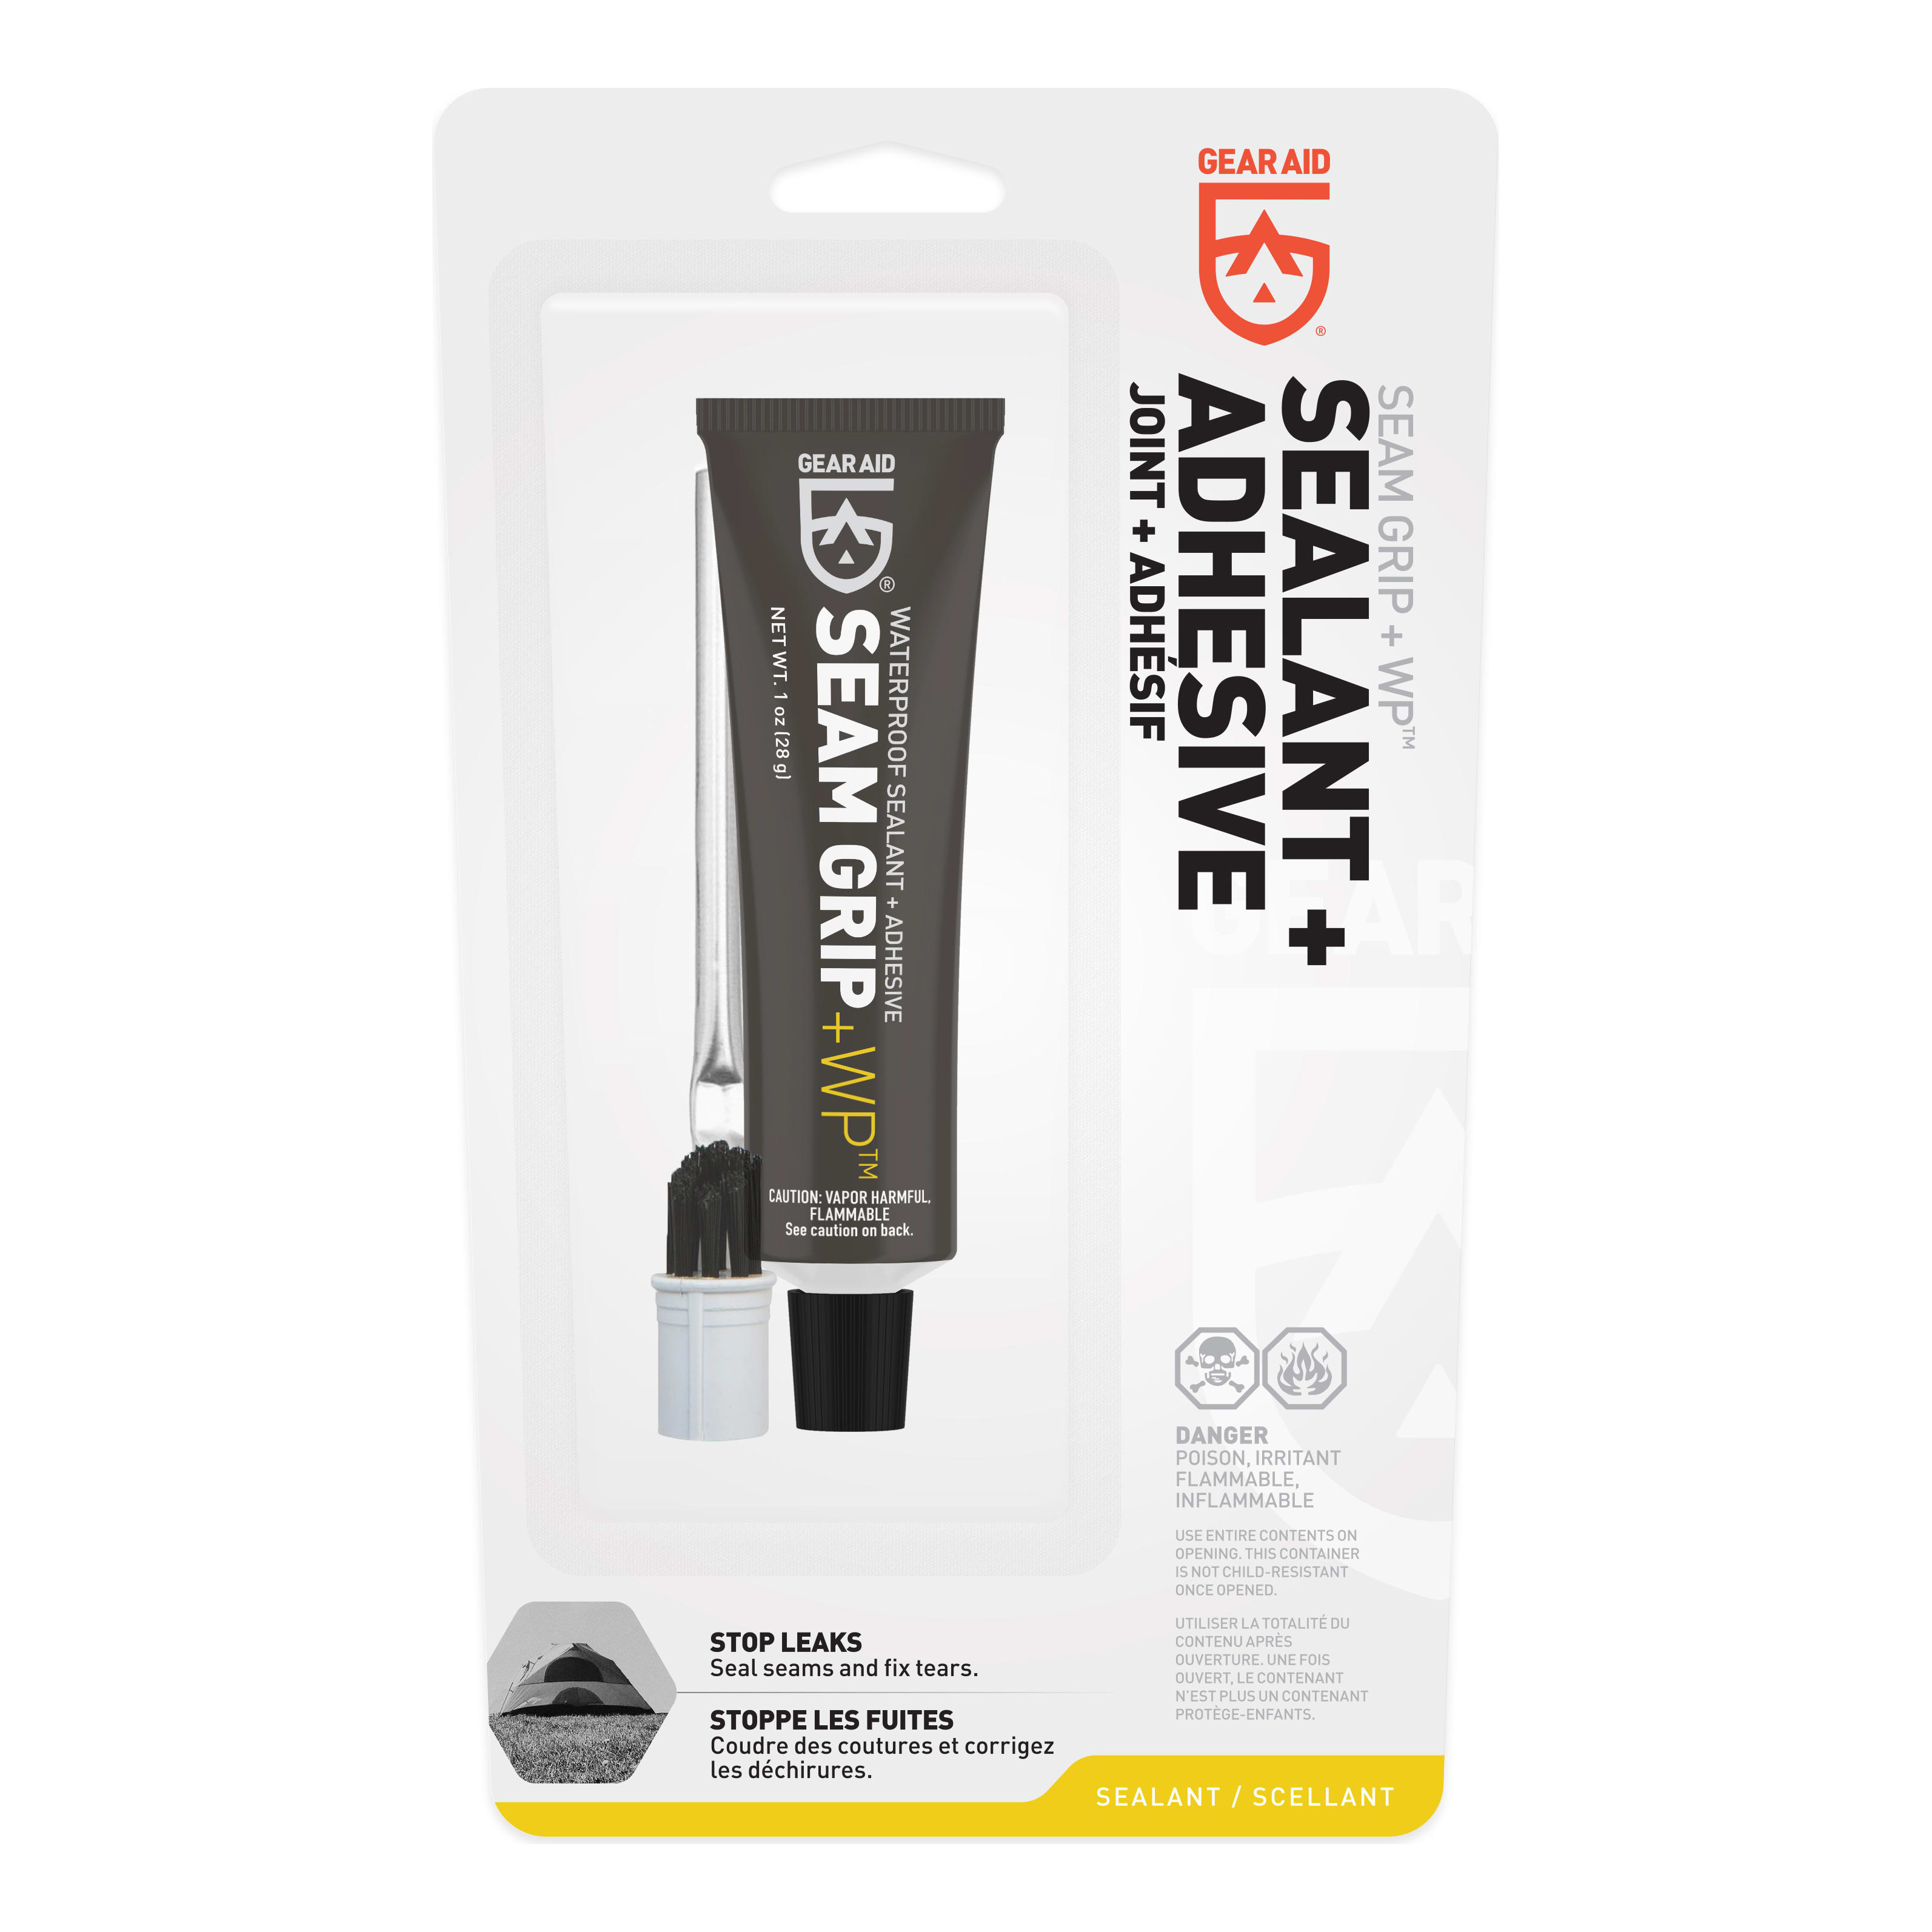 Gear Aid® Seam Grip WP Waterproof Sealant and Adhesive - Packaging View